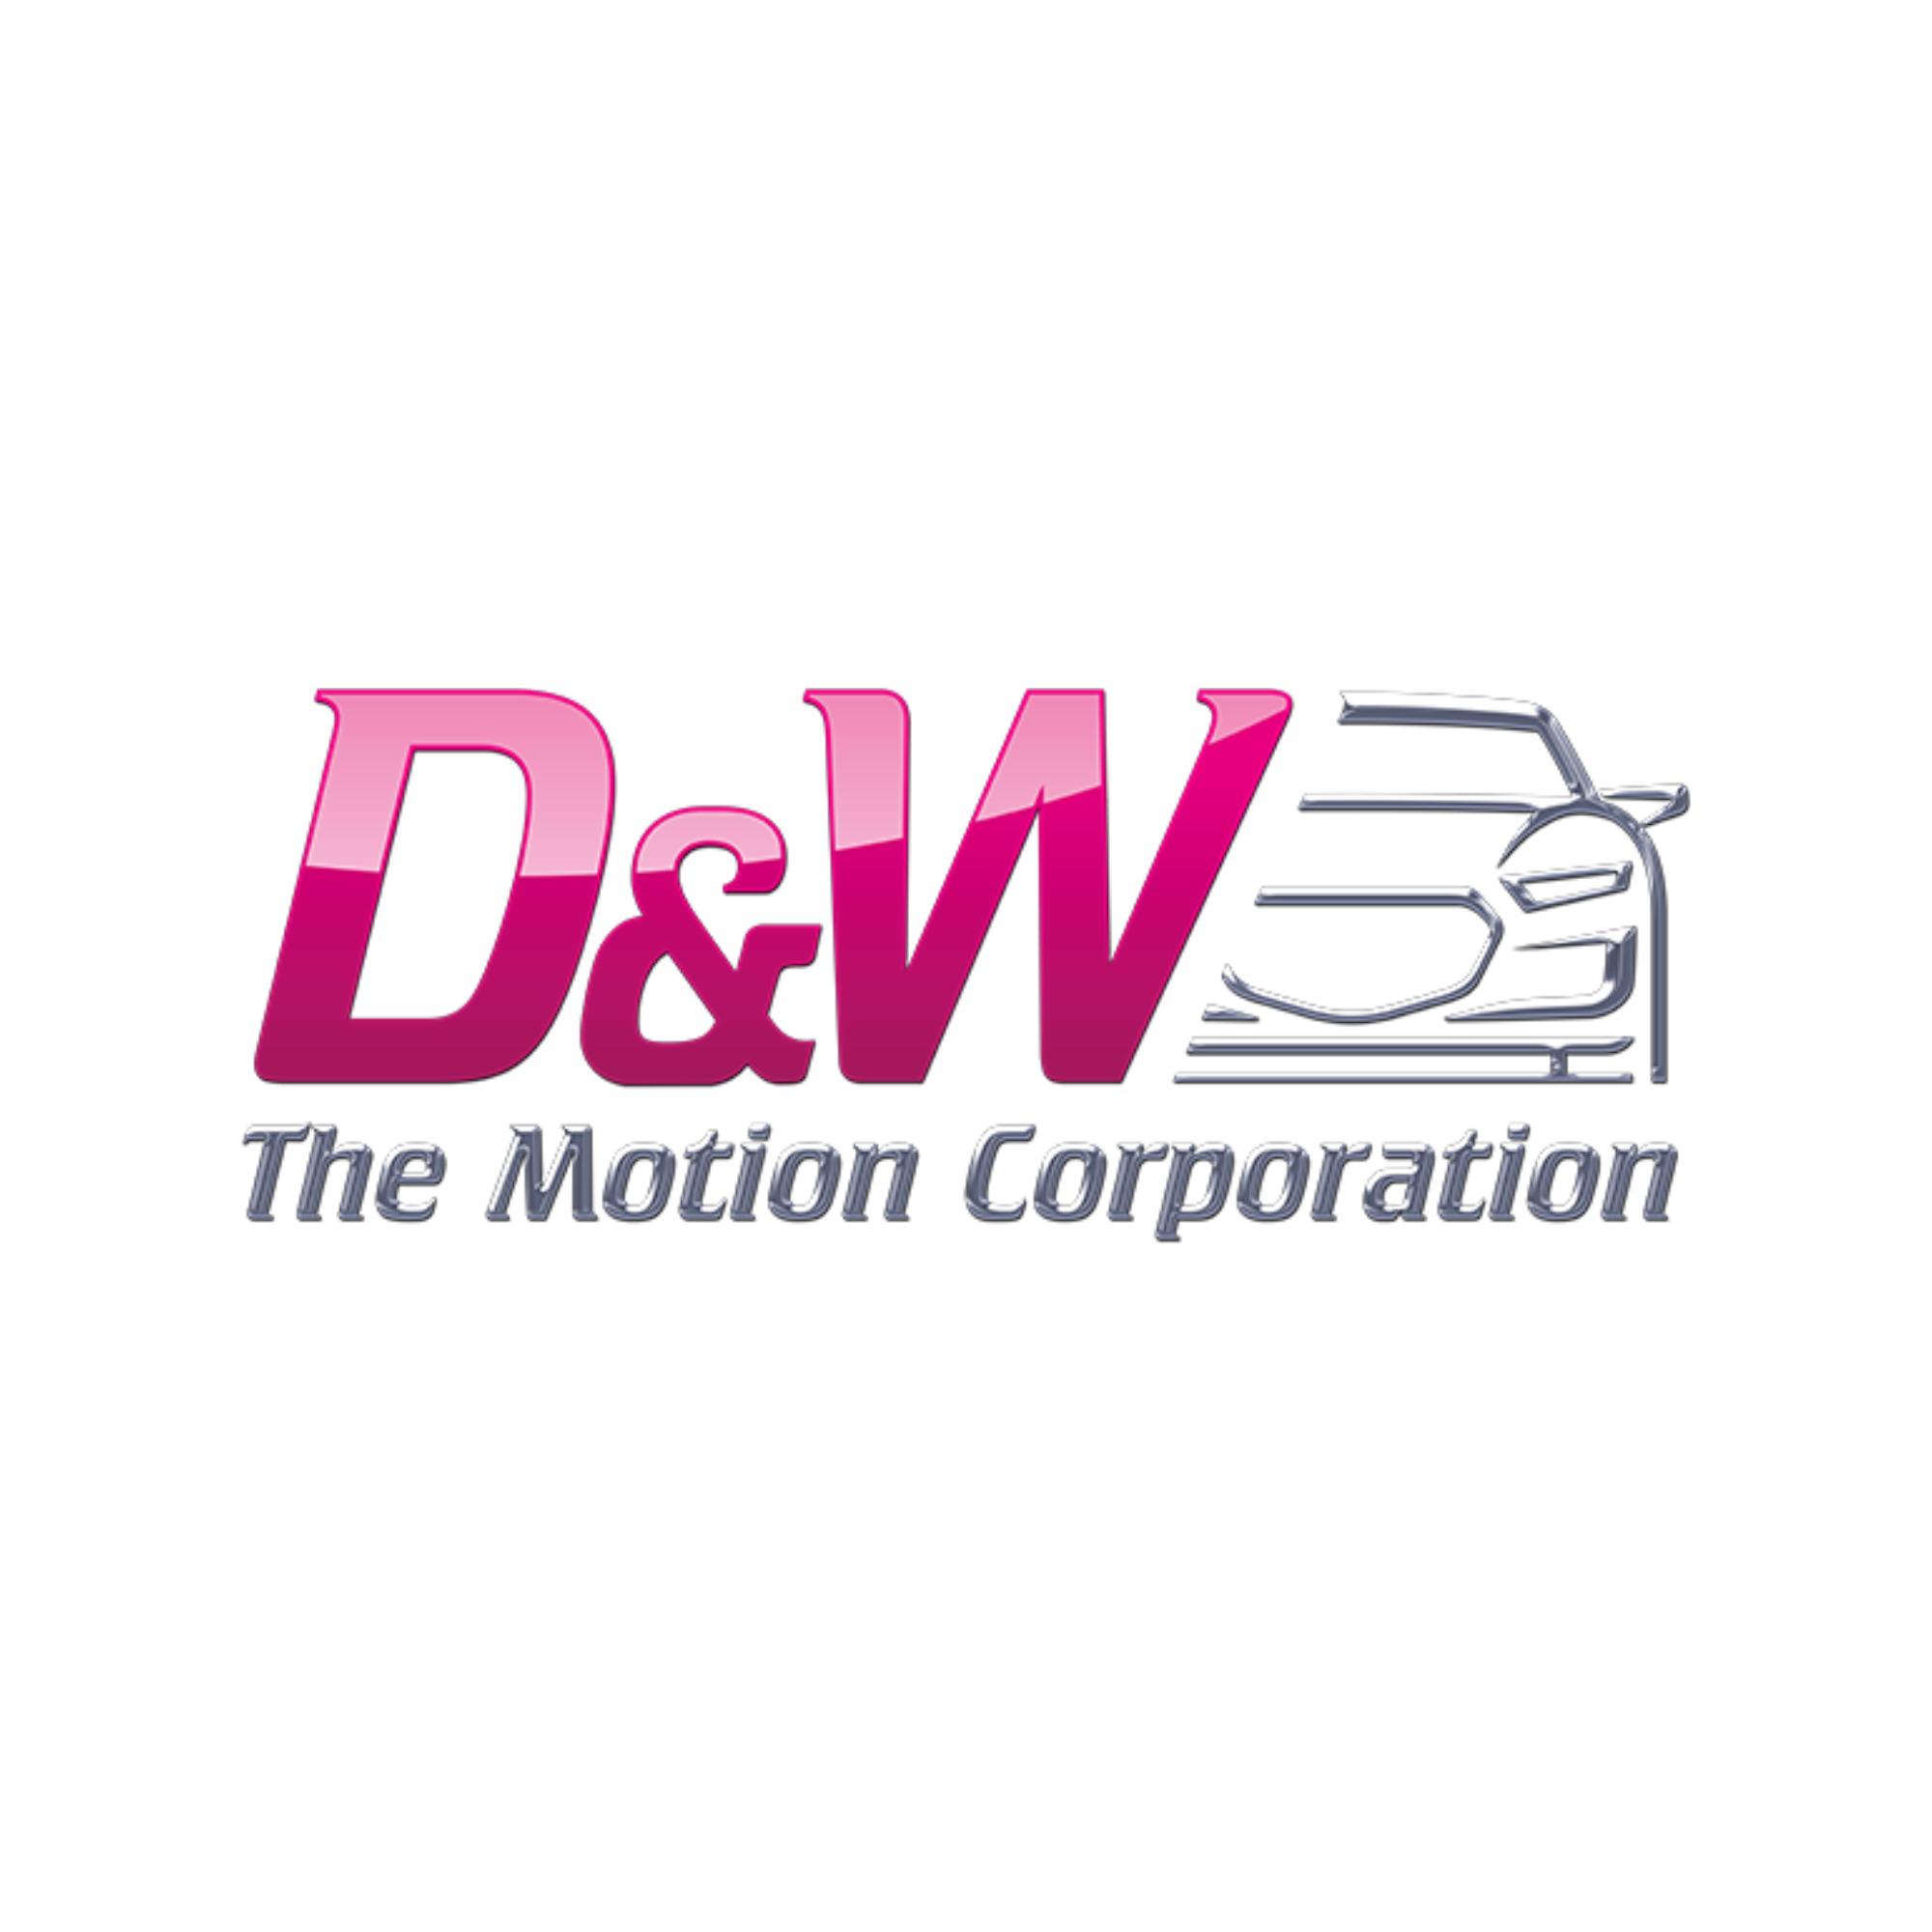 D & W The Motion Corporation GmbH & Co. KG in Bochum